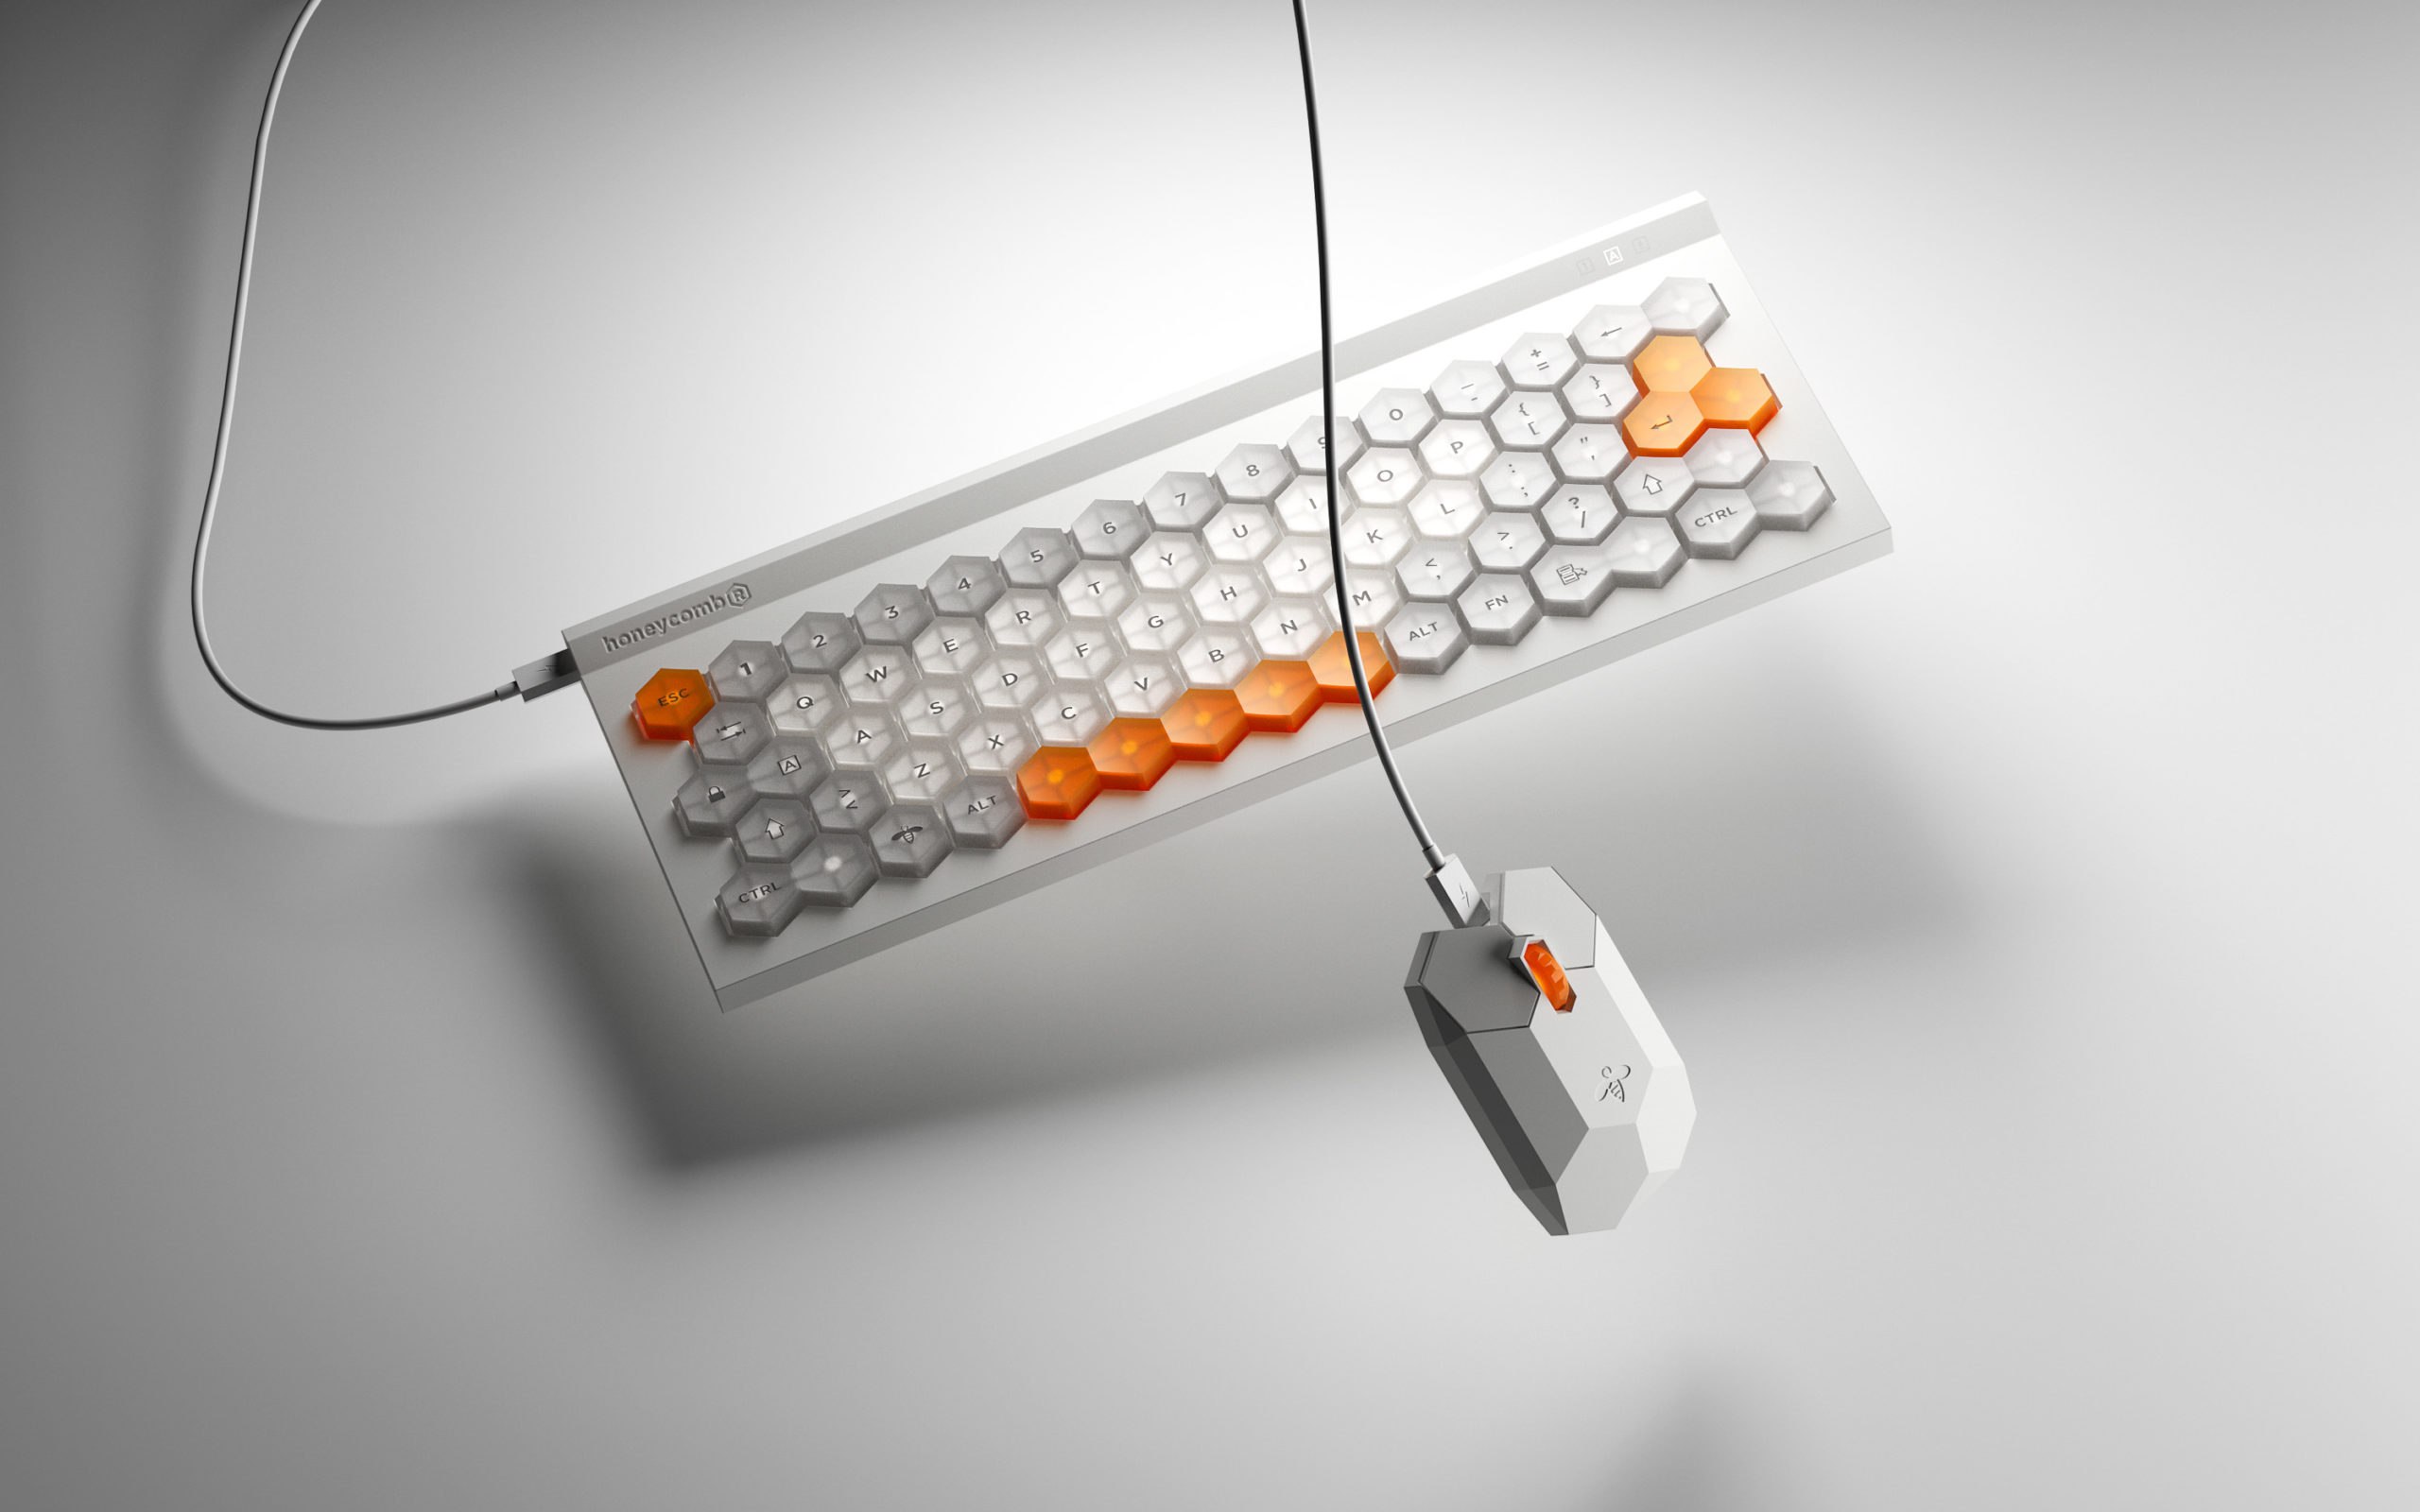 Honeycomb keyboard and mouse